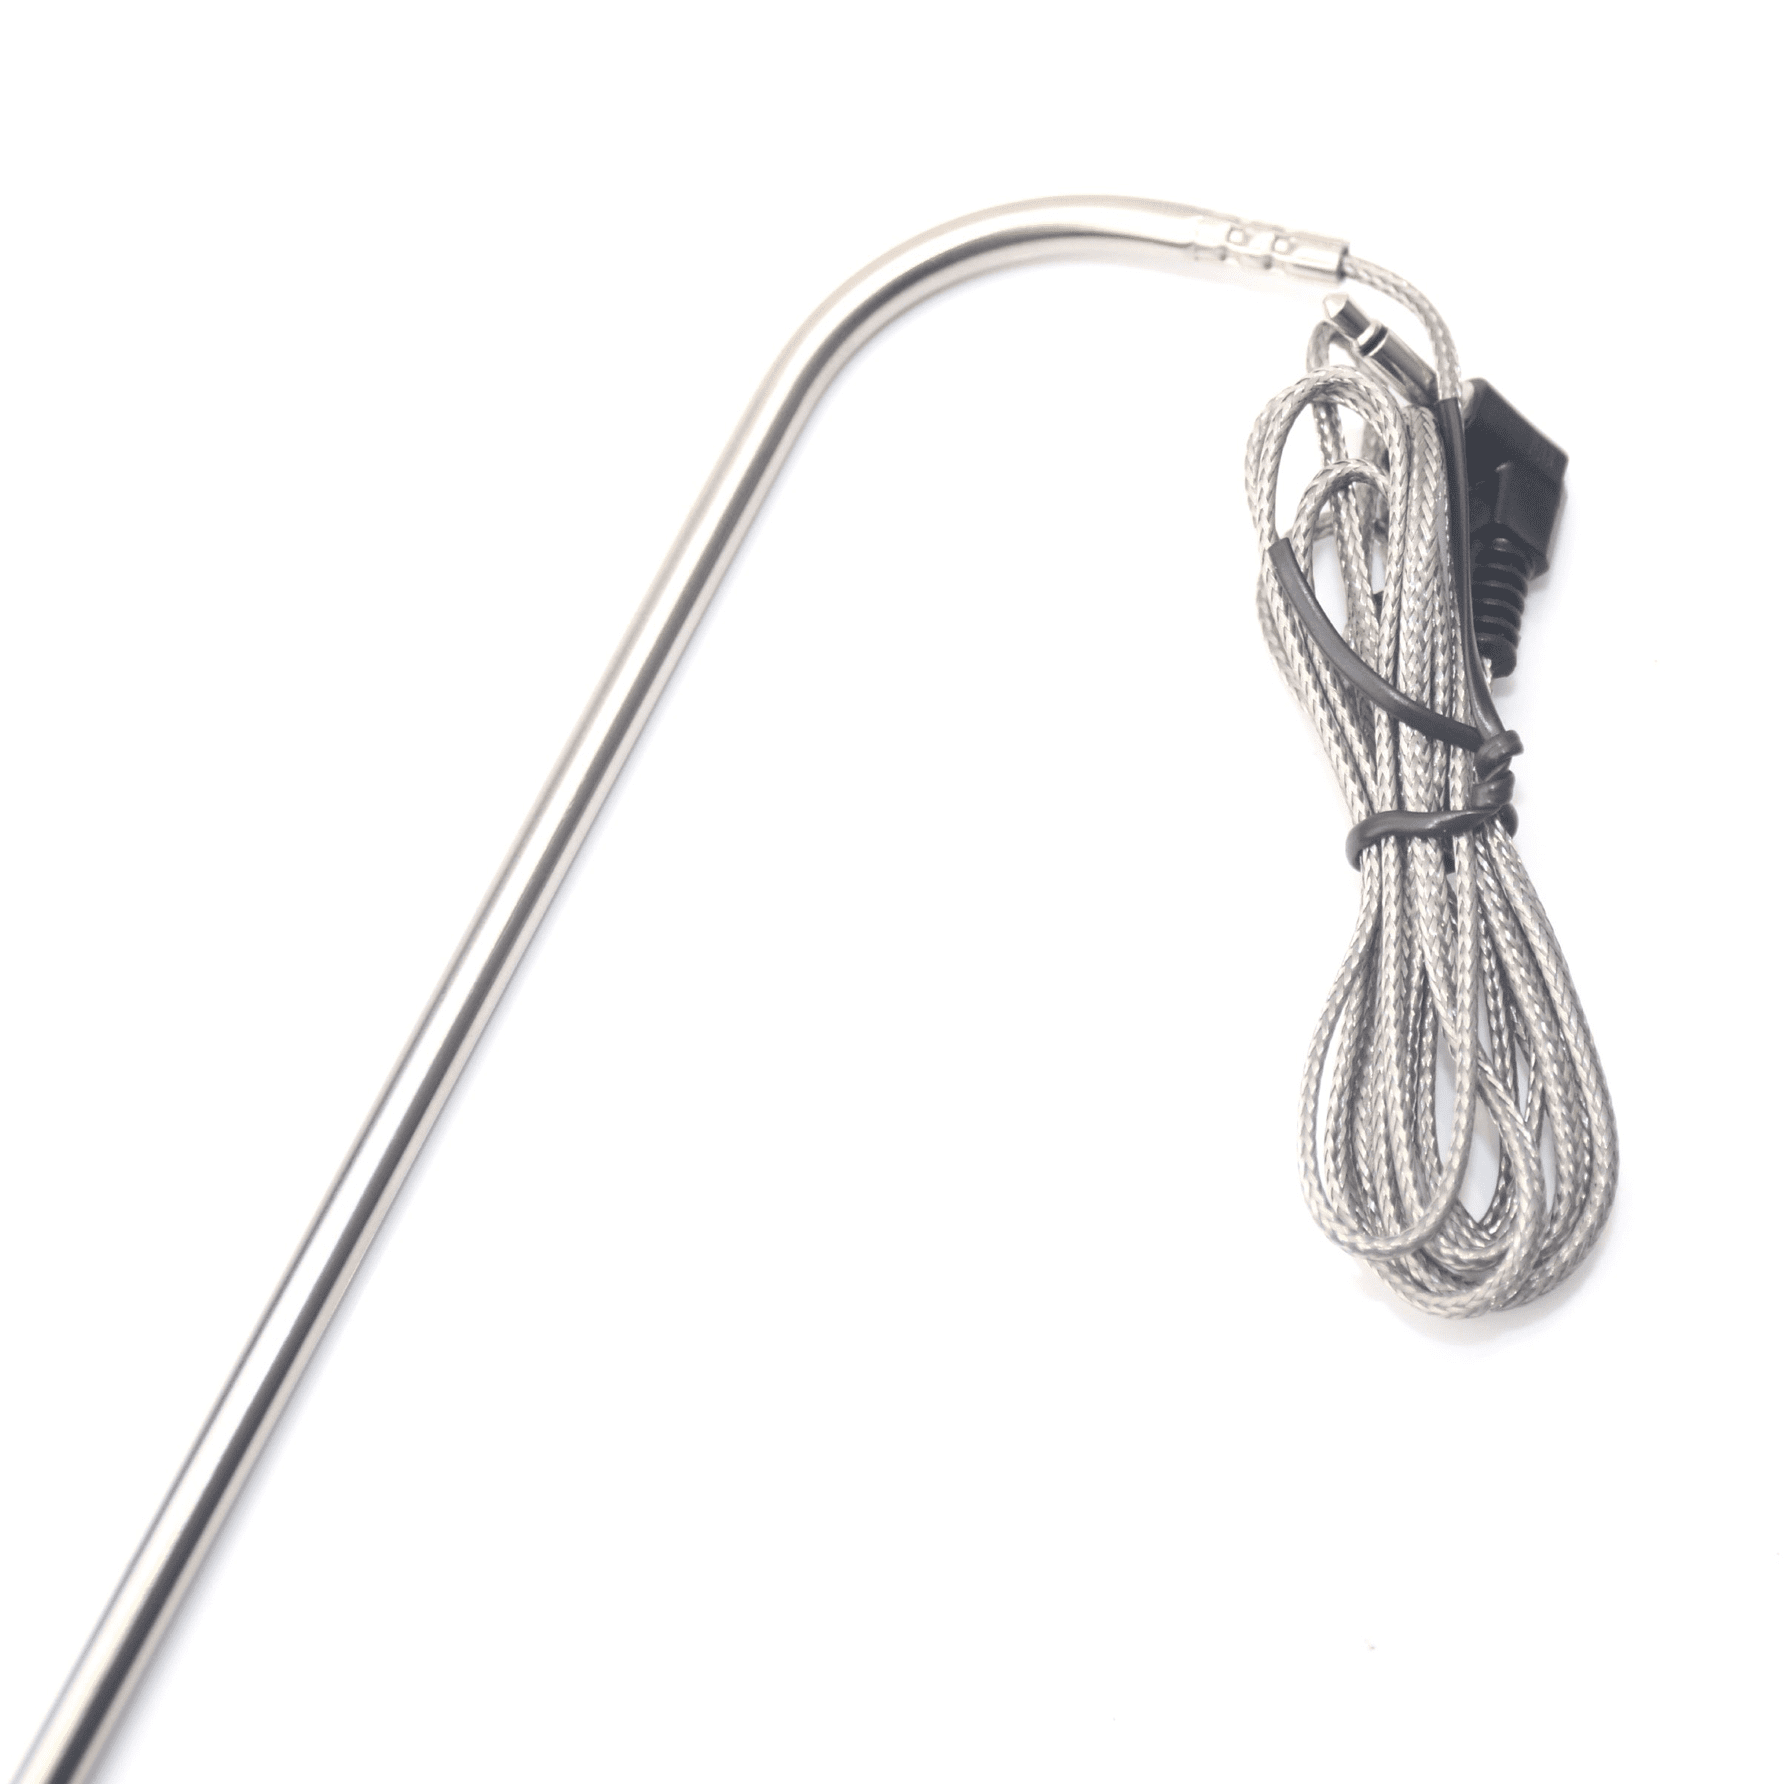 Details about   Grillhome Replacement High-Temperature Meat BBQ Probe for Camp Chef Pellet Grill 